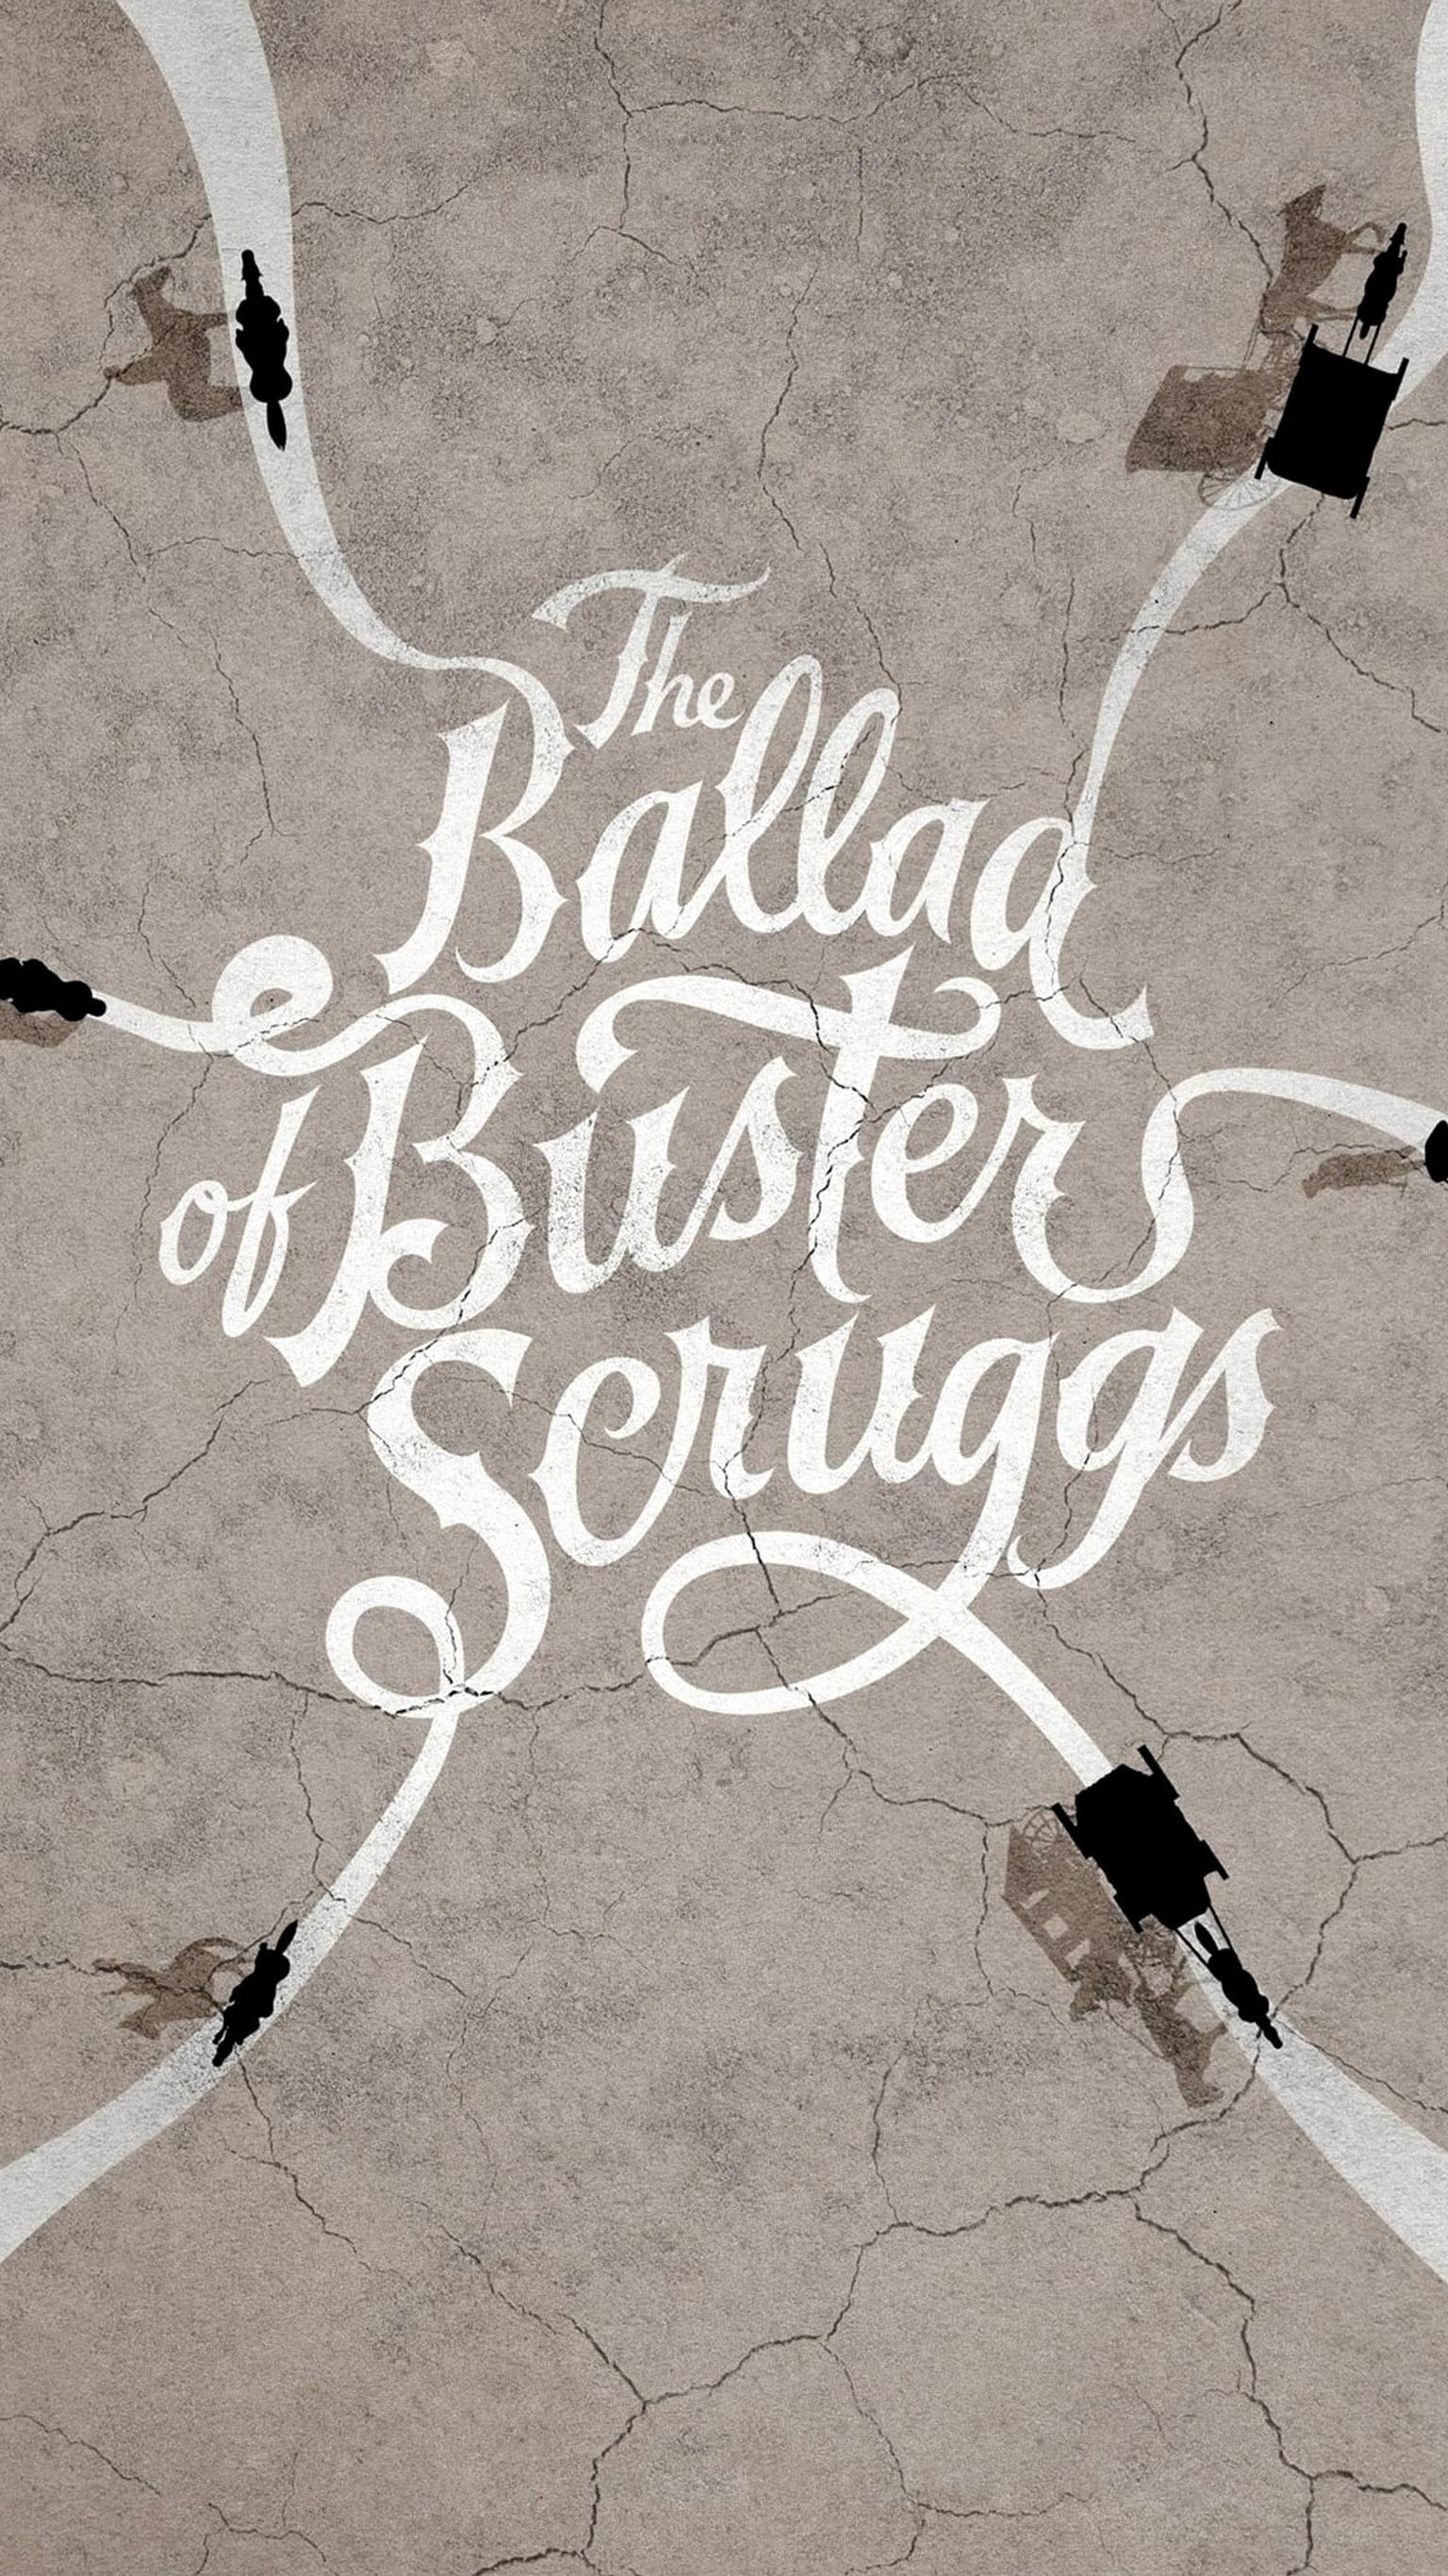 The Ballad of Buster Scruggs, Western anthology film, Unique storytelling, Memorable characters, 1540x2740 HD Handy